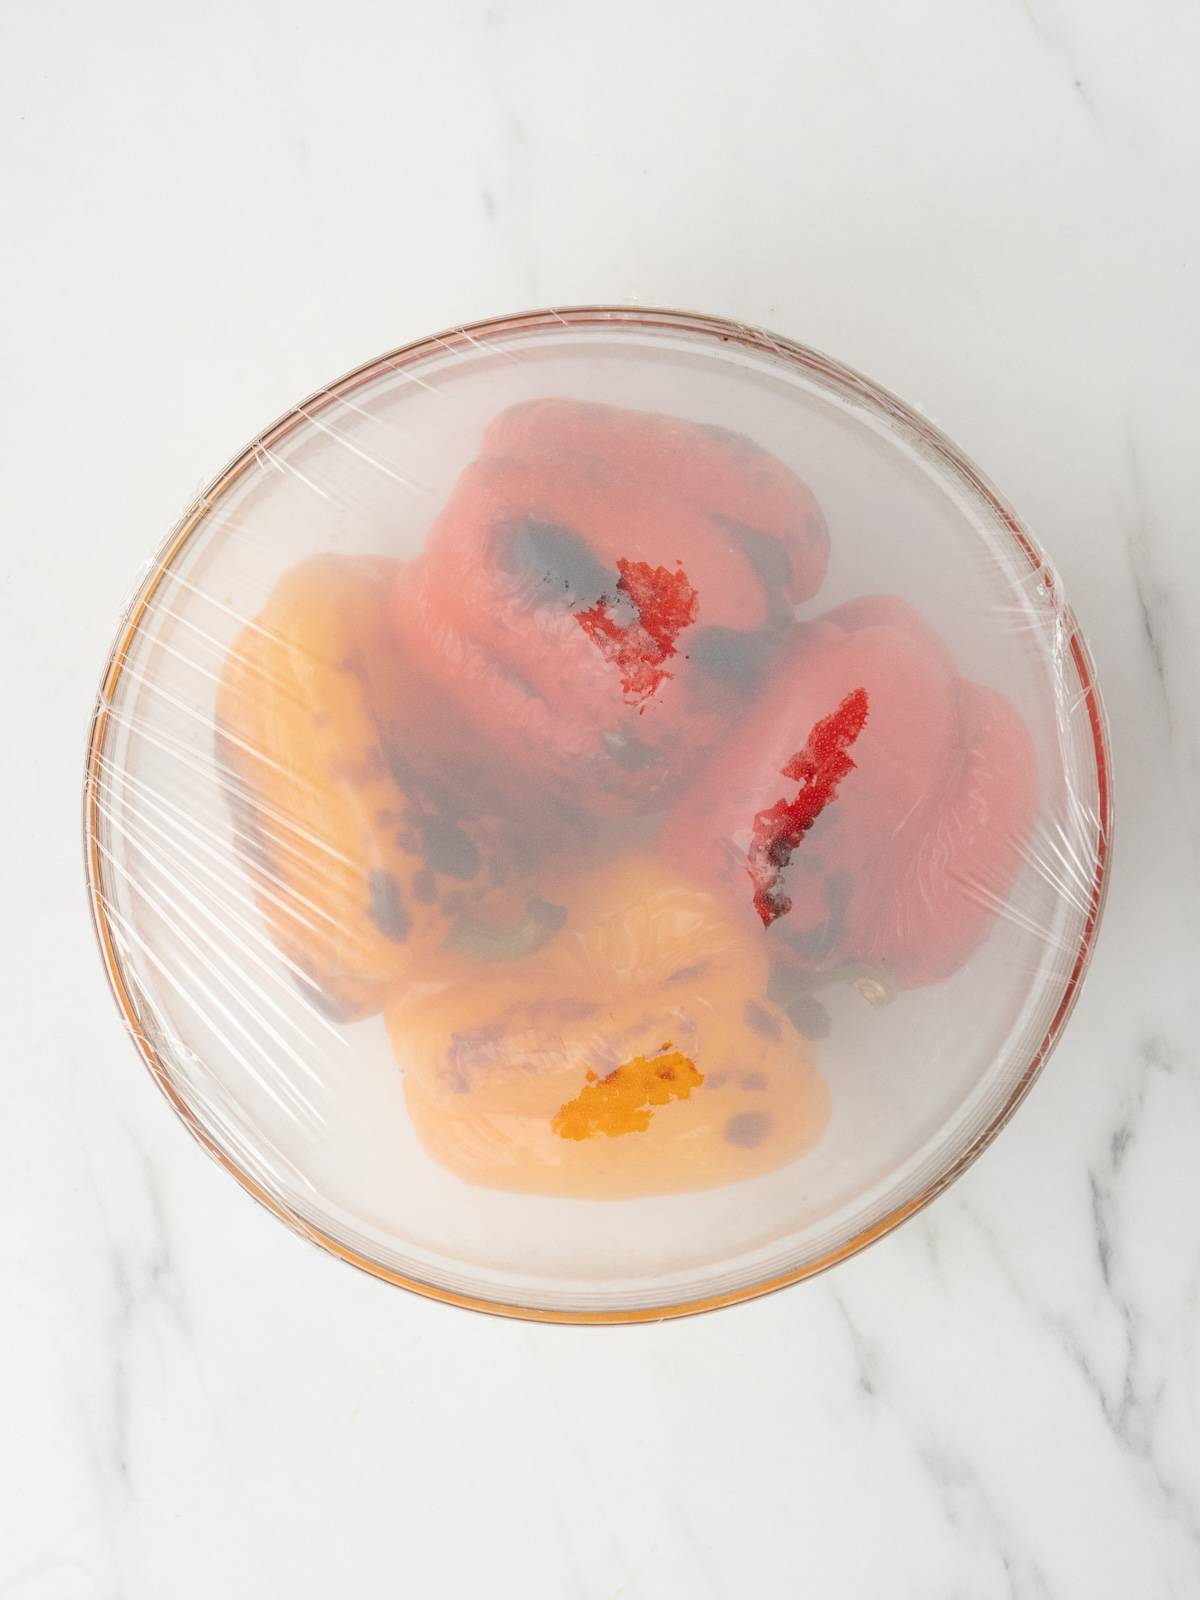 A glass mixing bowl with roasted red and yellow bell peppers, and the bowl is covered with cling wrap.